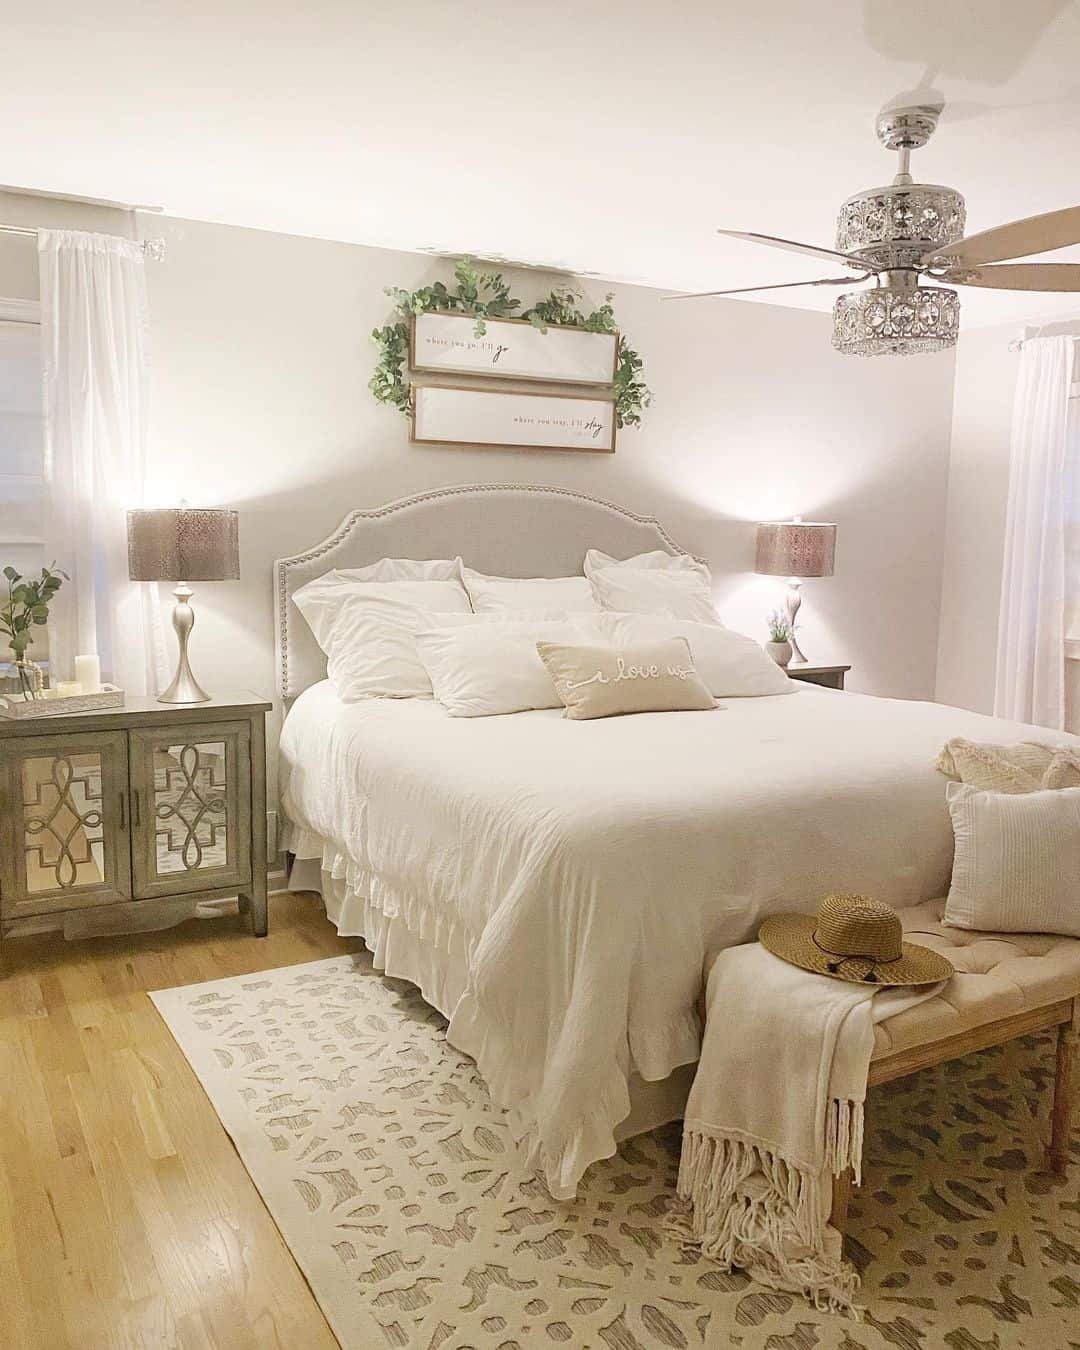 30 Charming Small Guest Bedroom Ideas for a Cozy Space